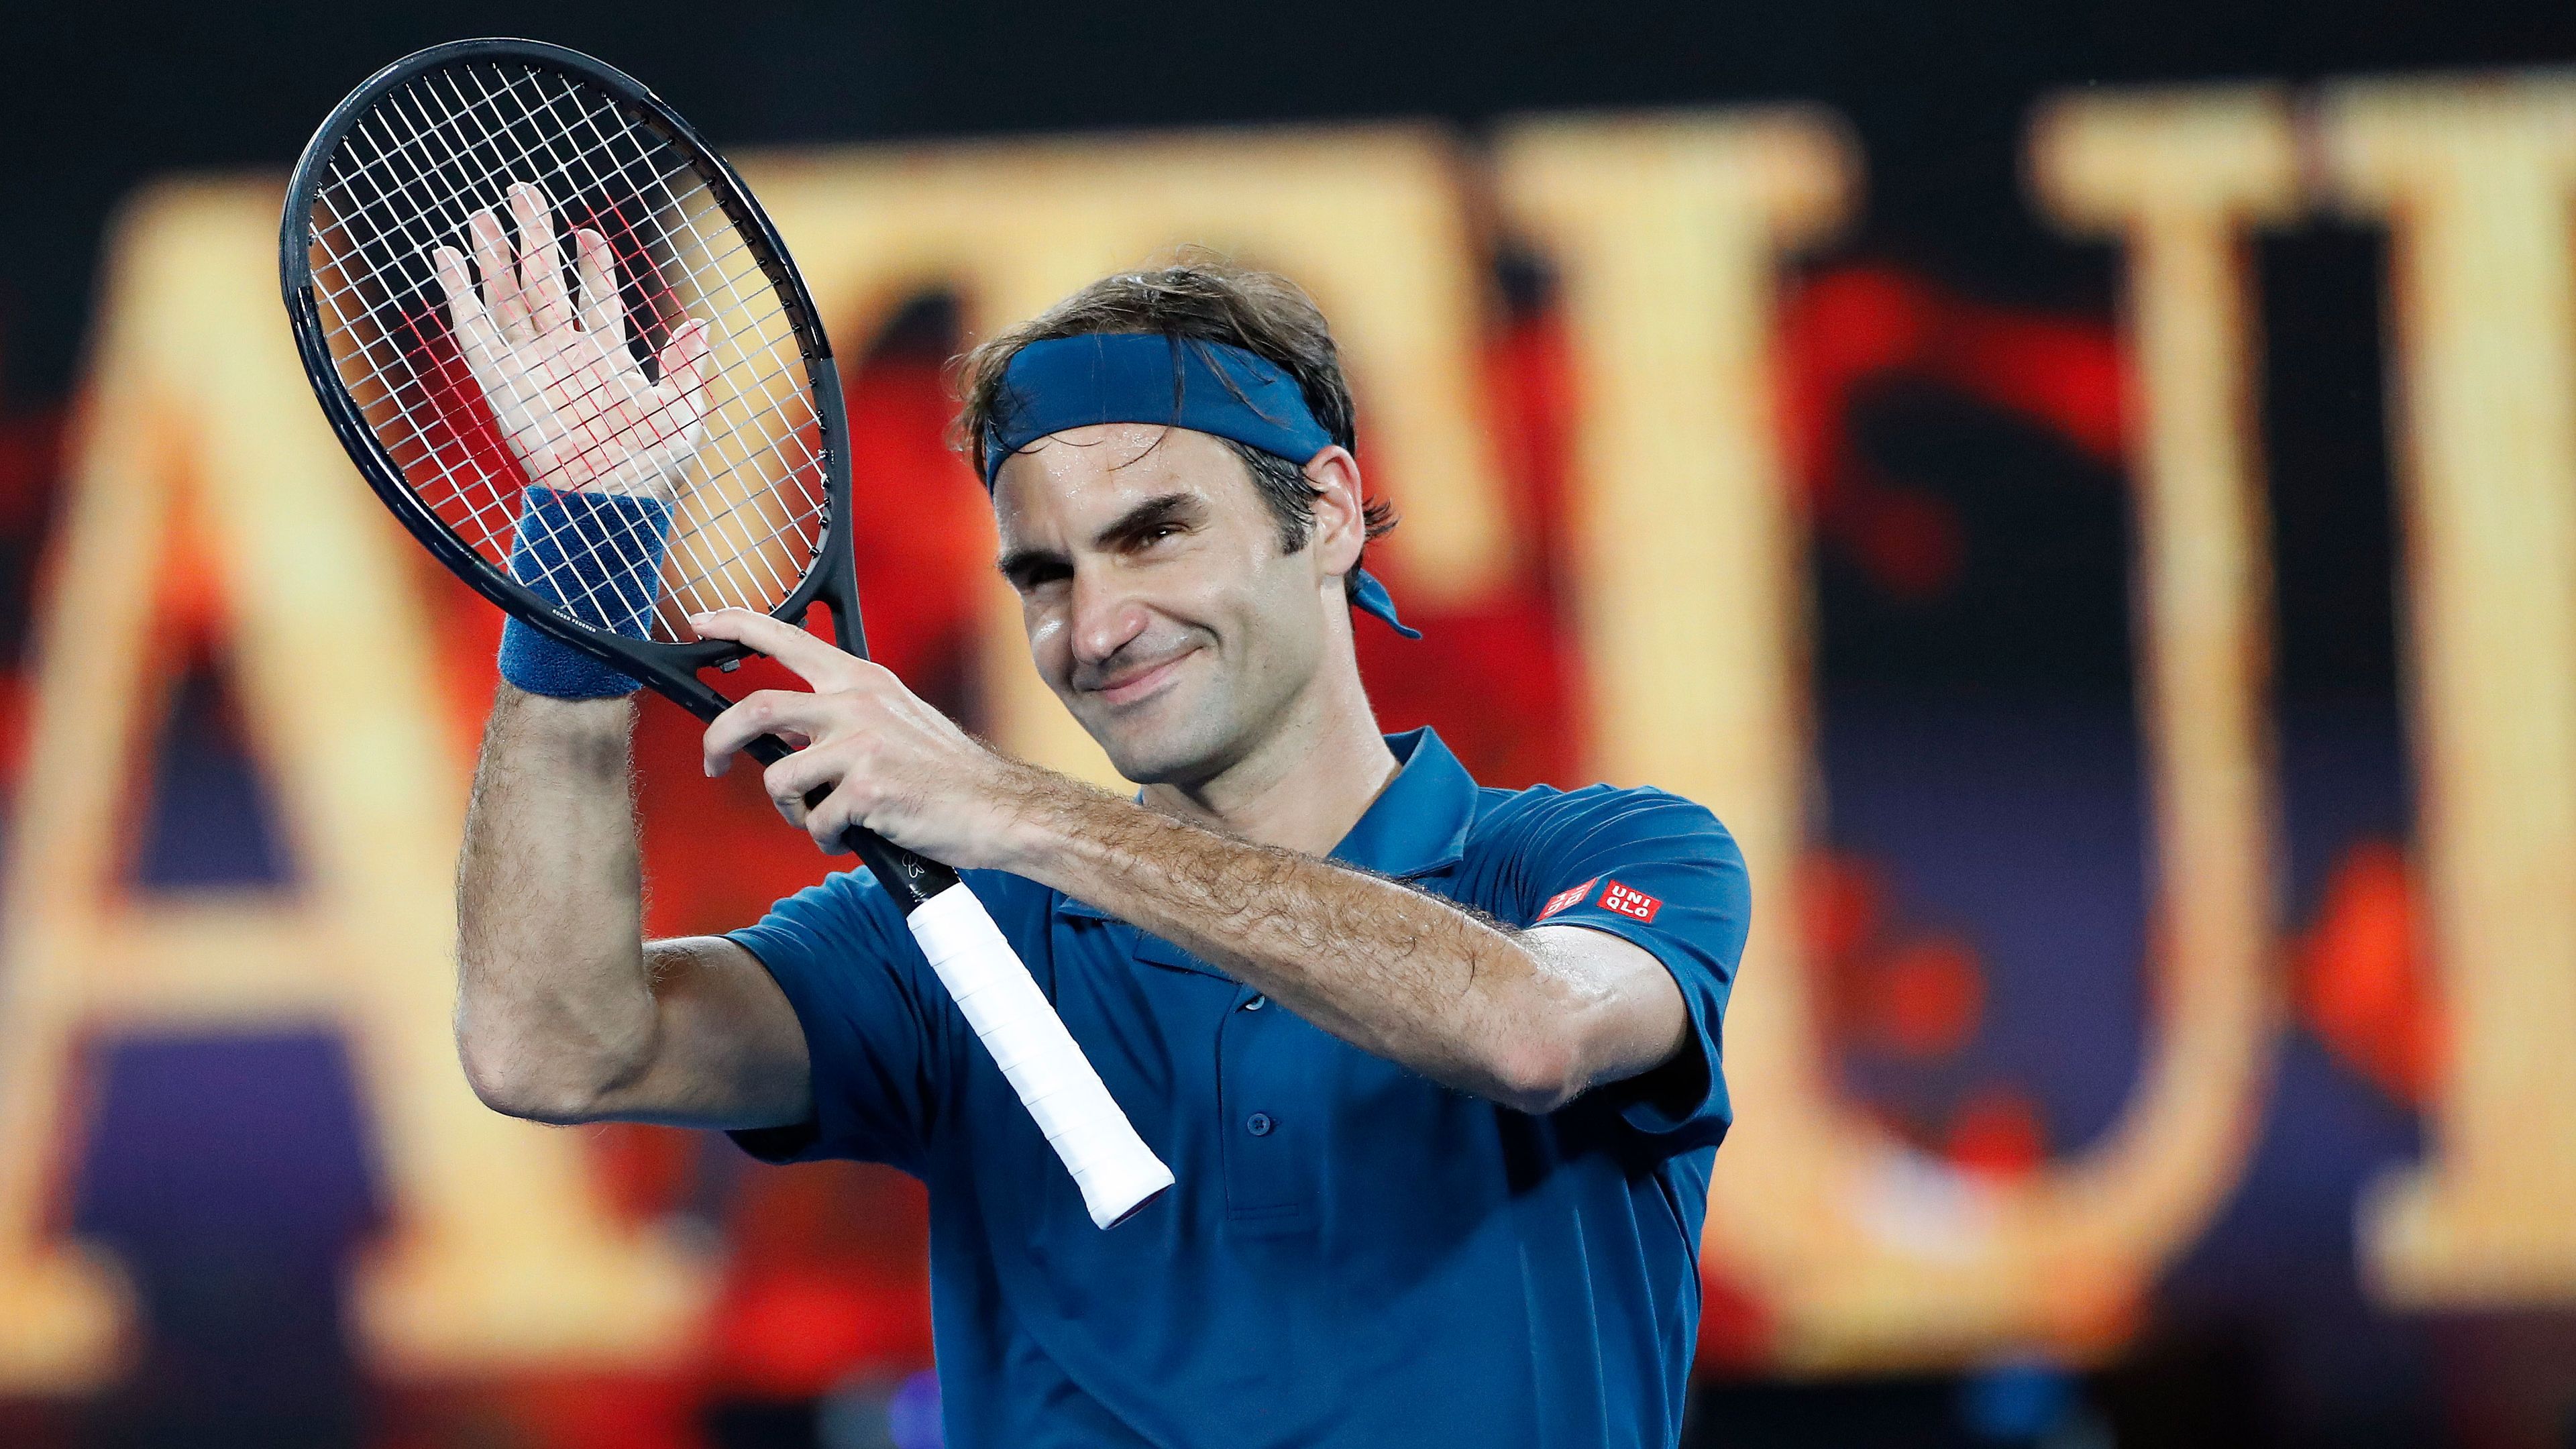 Roger Federer gives surprising reaction to Nick Kyrgios commentary after his match